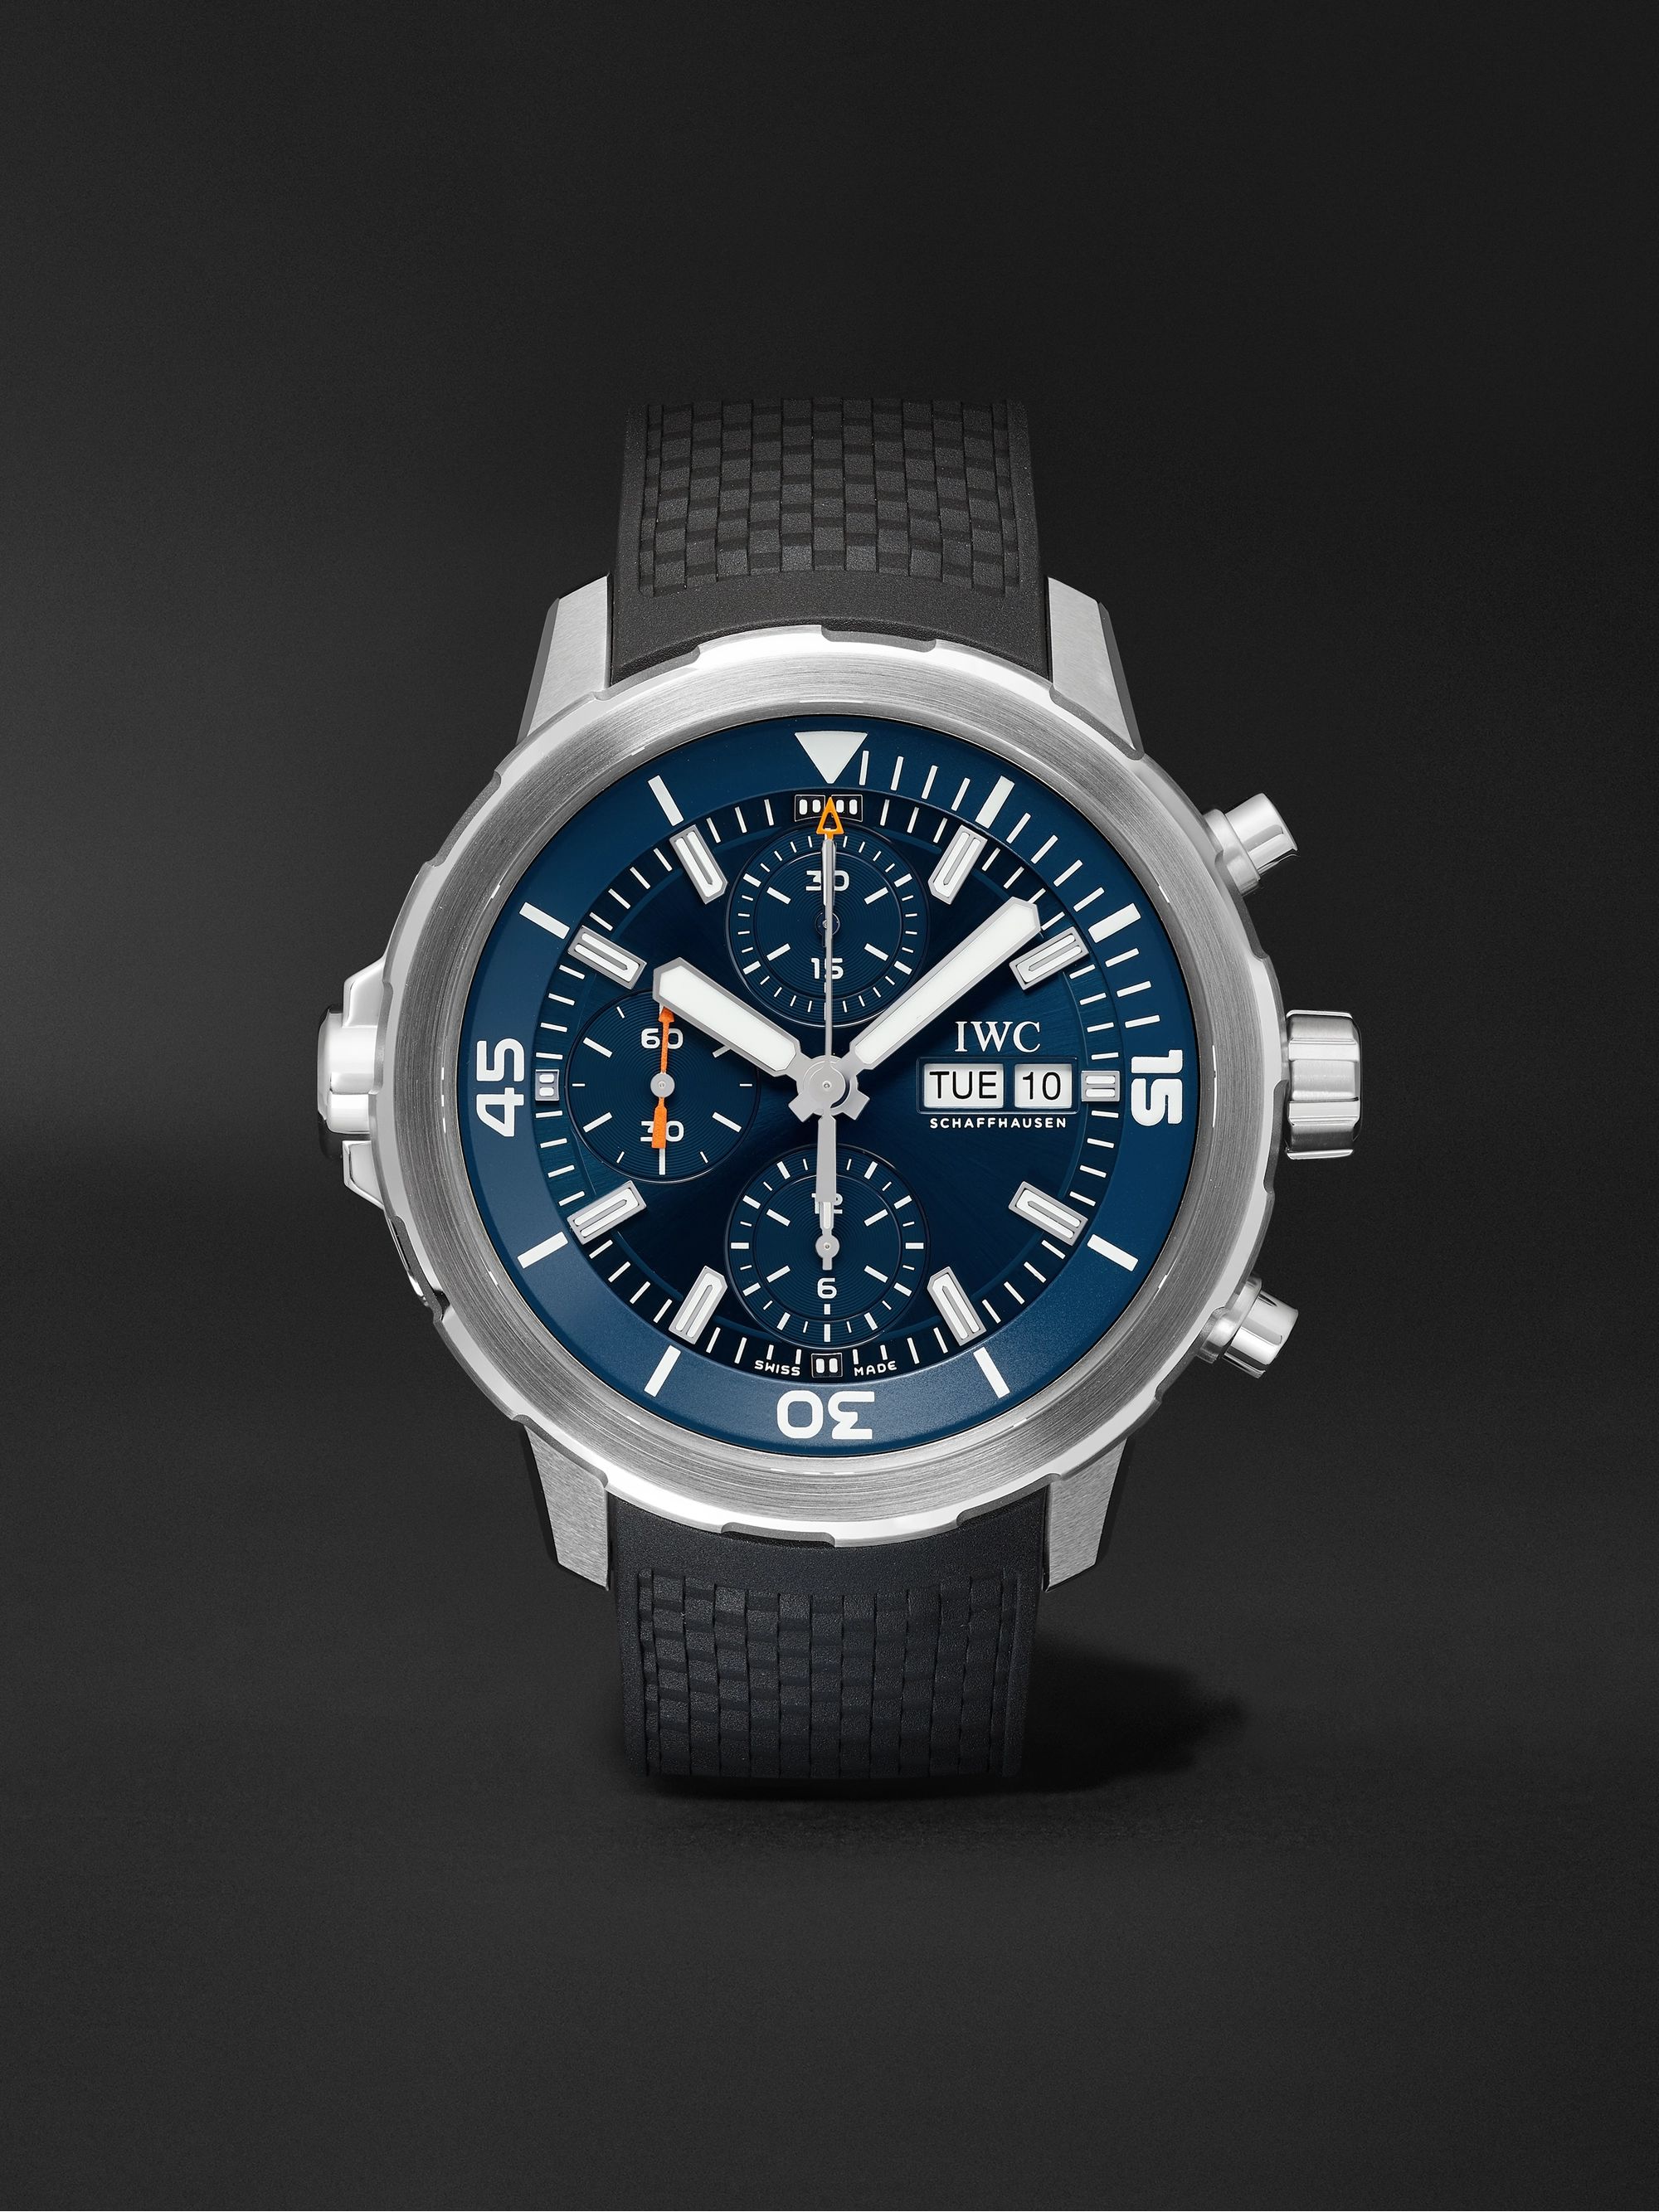 IWC SCHAFFHAUSEN Aquatimer Expedition Jacques-Yves Cousteau Edition Automatic Chronograph 44mm Stainless Steel and Rubber Watch, Ref. No. IW376805